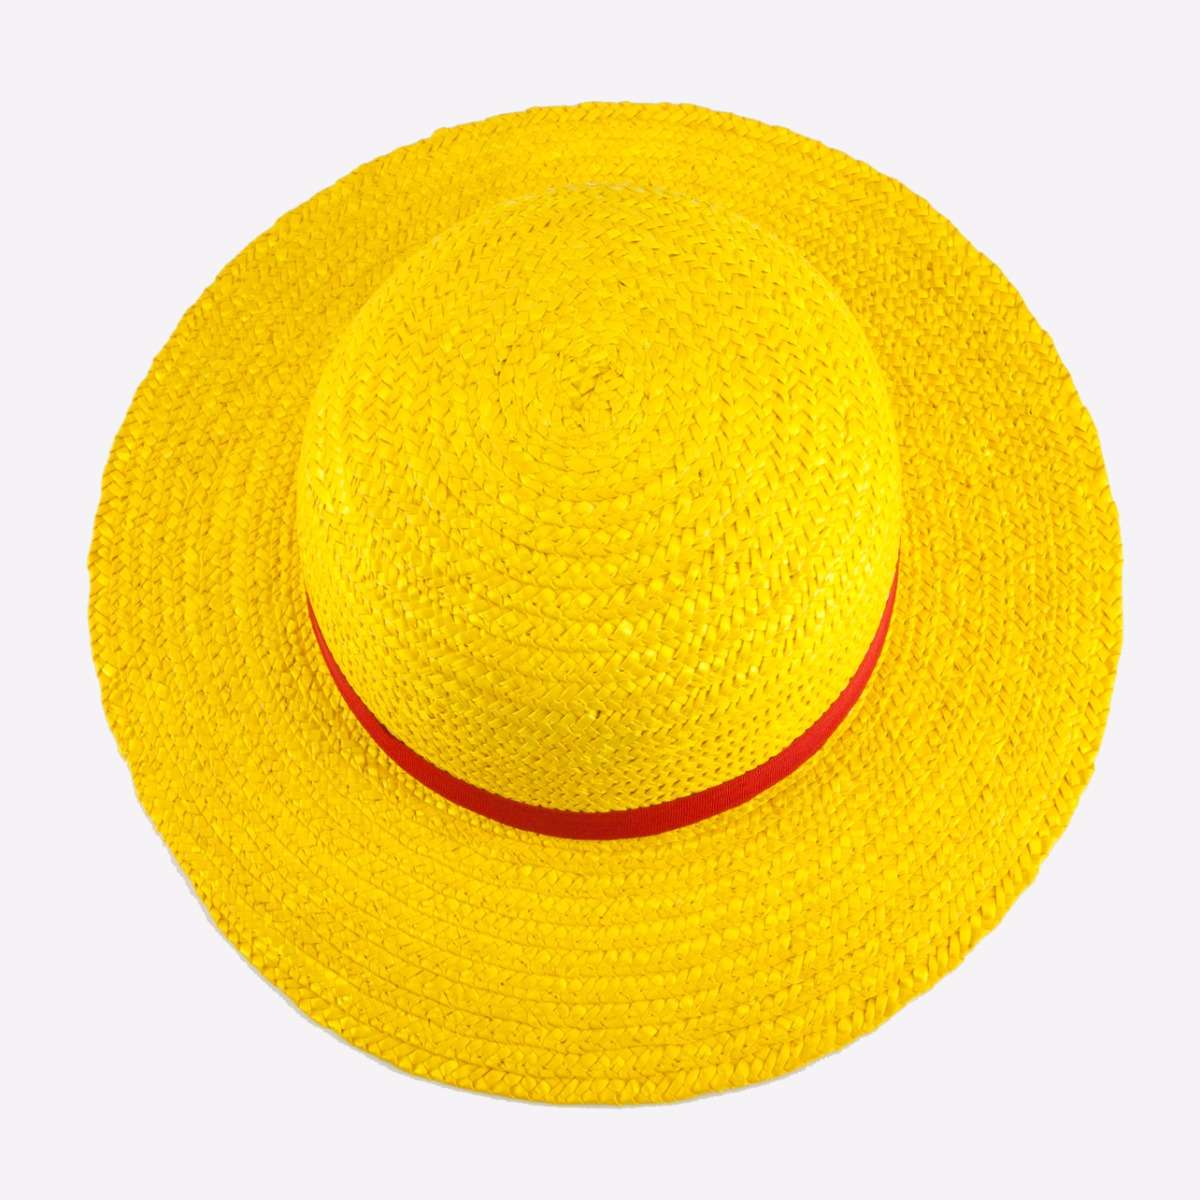 Shop One Piece Luffy's Hat | Funimation